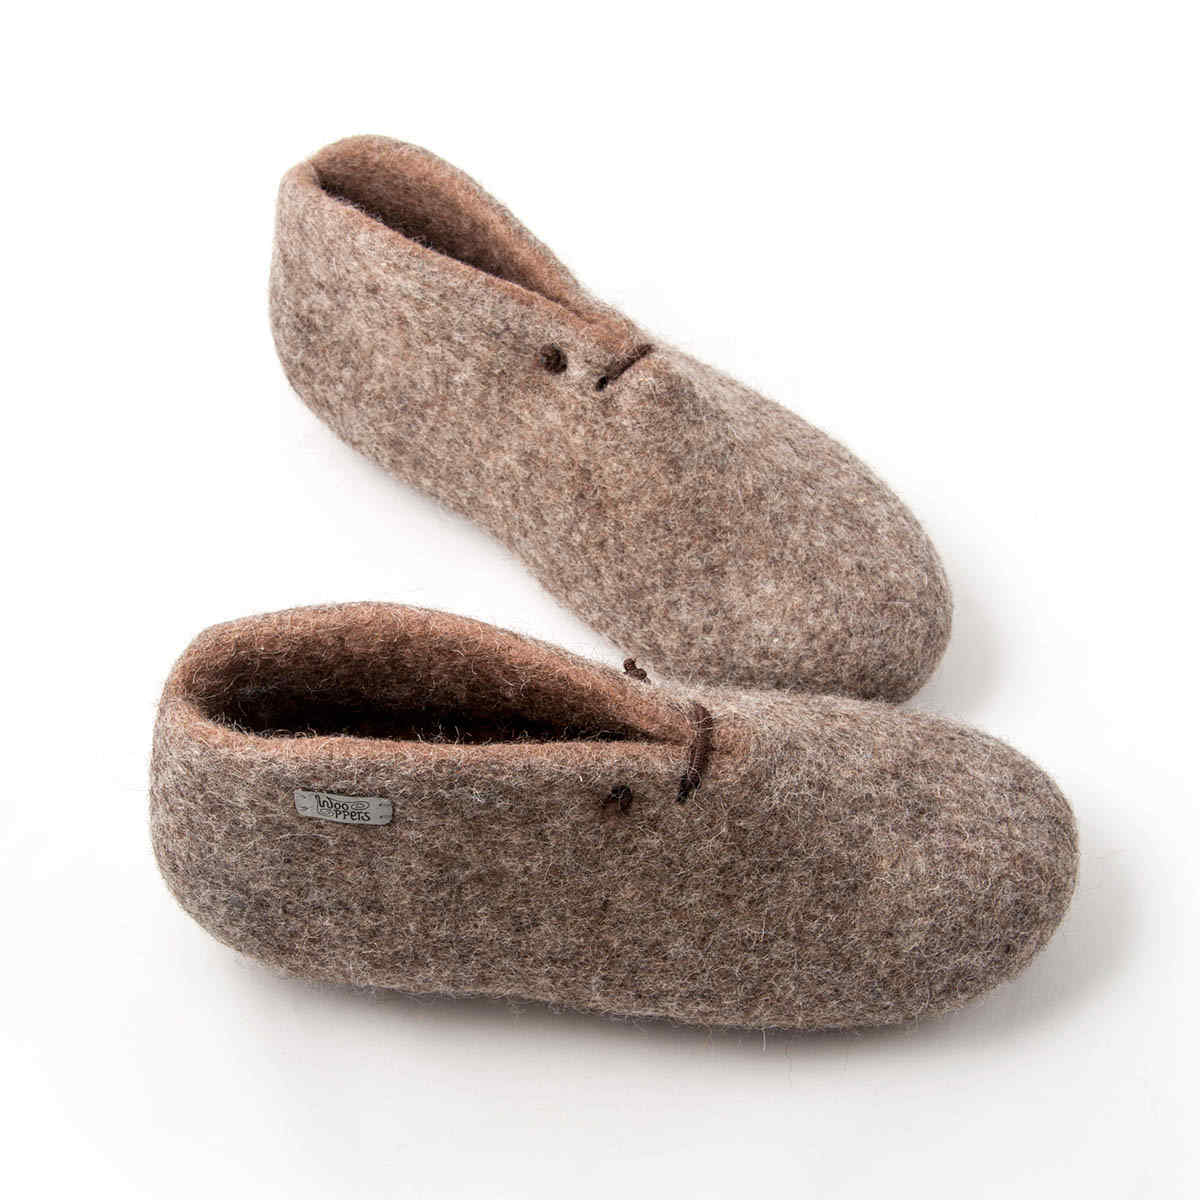 House boots in grey and brown Women's Slippers, Women's Slippers, BOOTIES